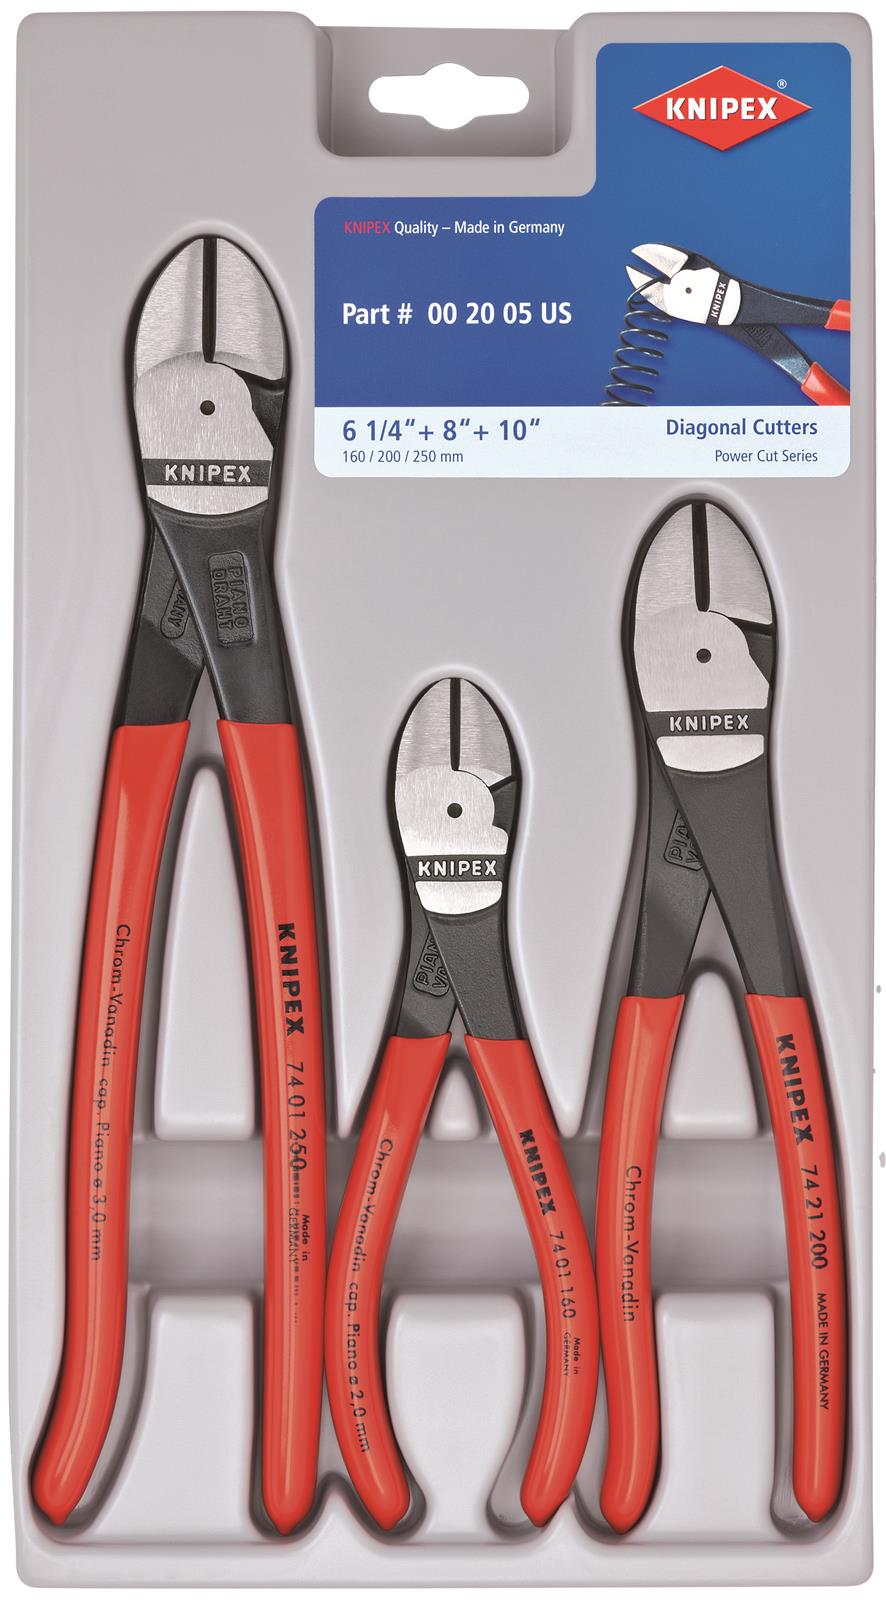 Knipex 00 20 05 US Knipex High-Leverage Diagonal Cutters | Summit Racing